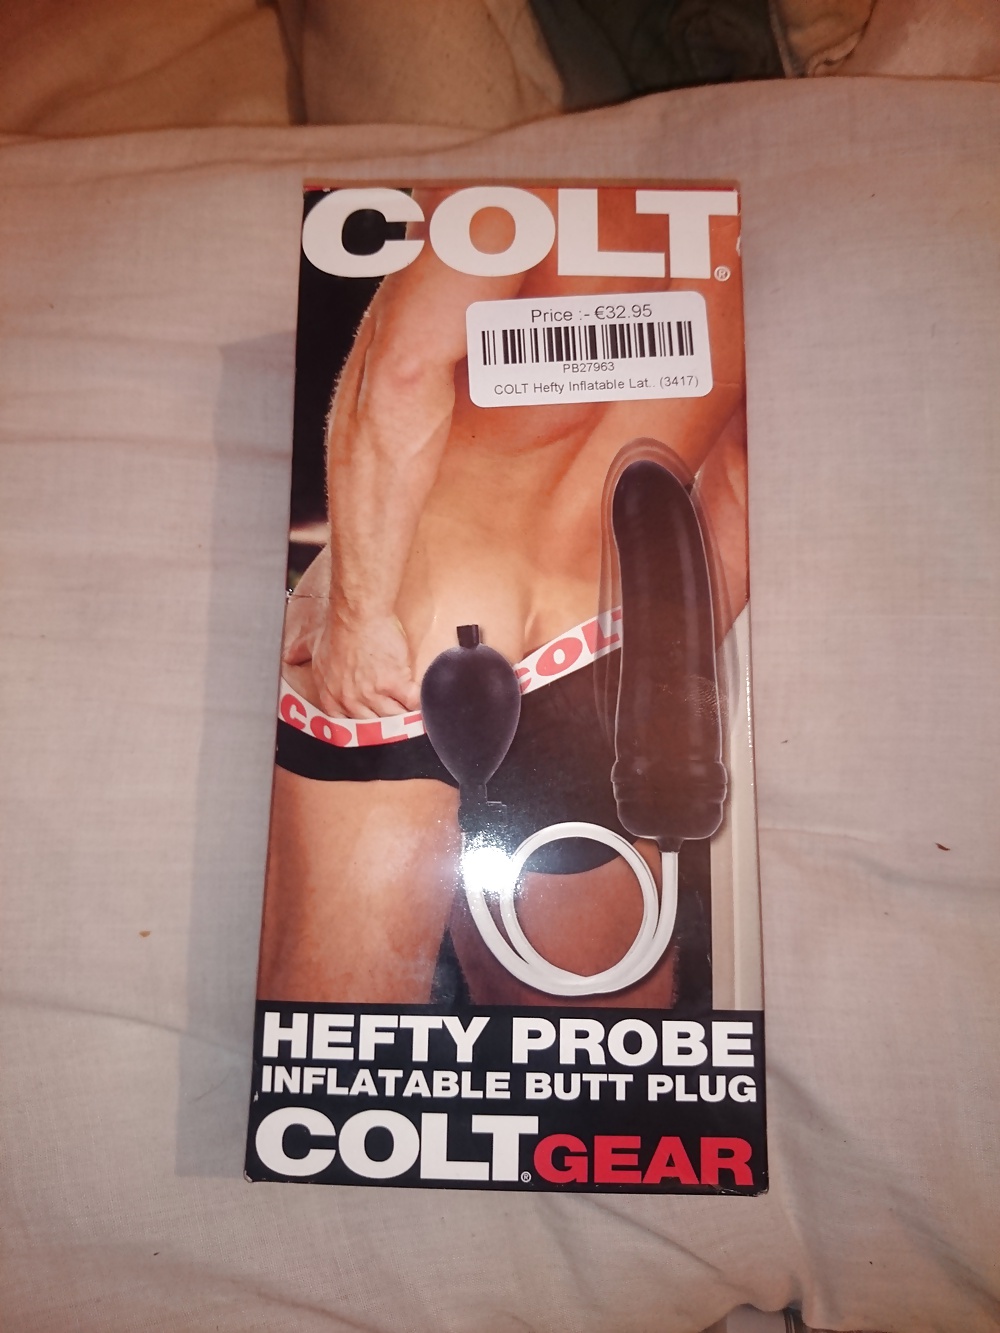 More anal toys i bought today #32658713